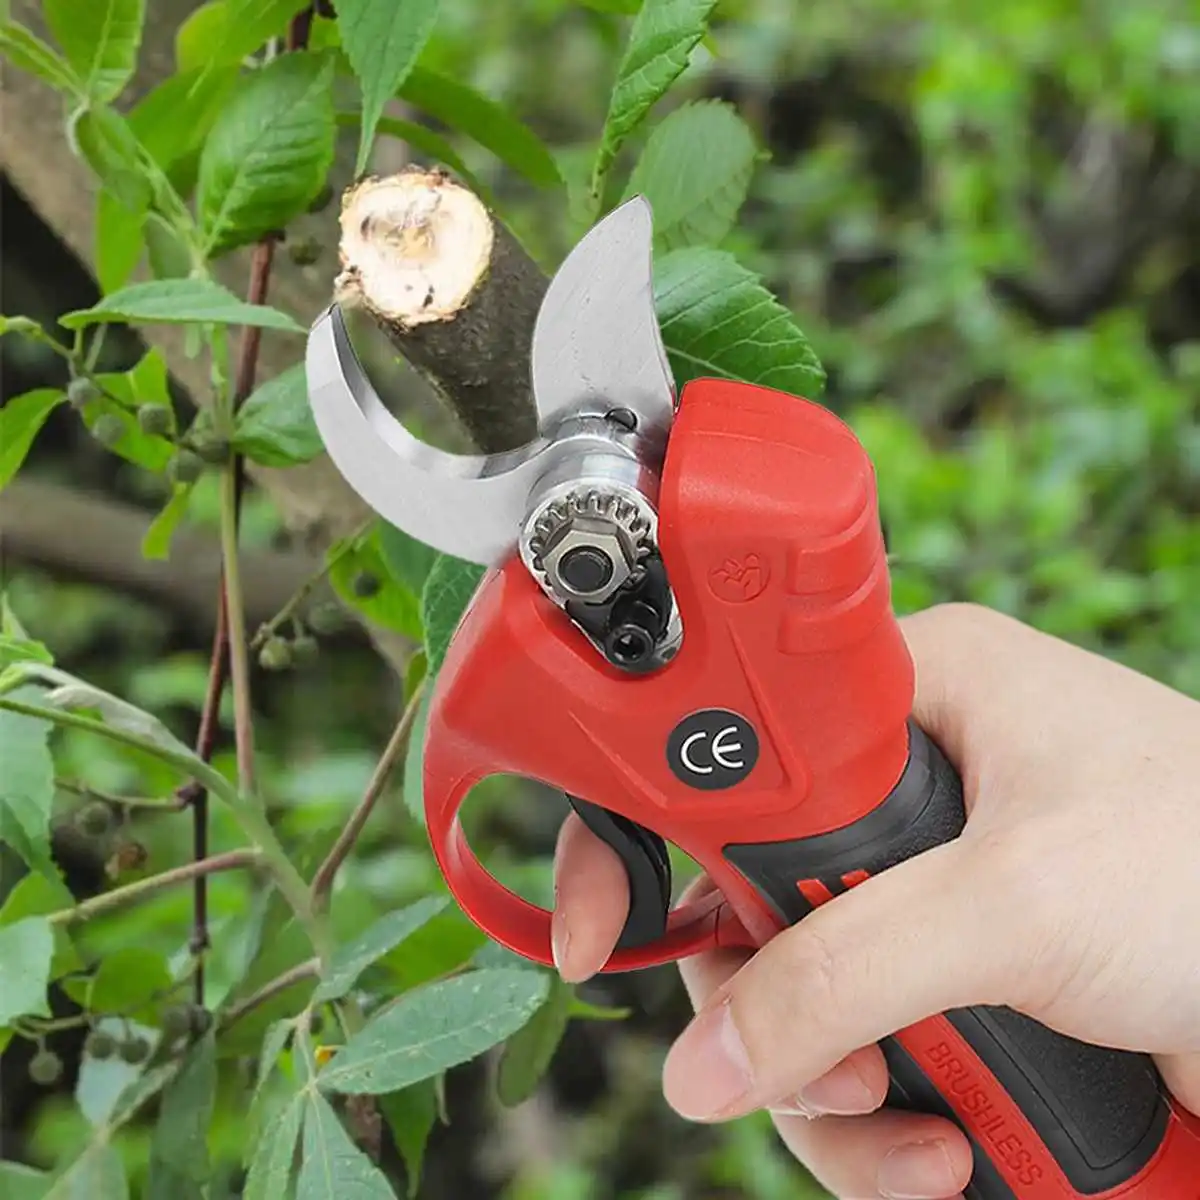 18V 4 Gear Brushless Cordless Pruner Shear Efficient Fruit Tree Bonsai Pruning Electric Tree Branches Cutter for Makita Battery